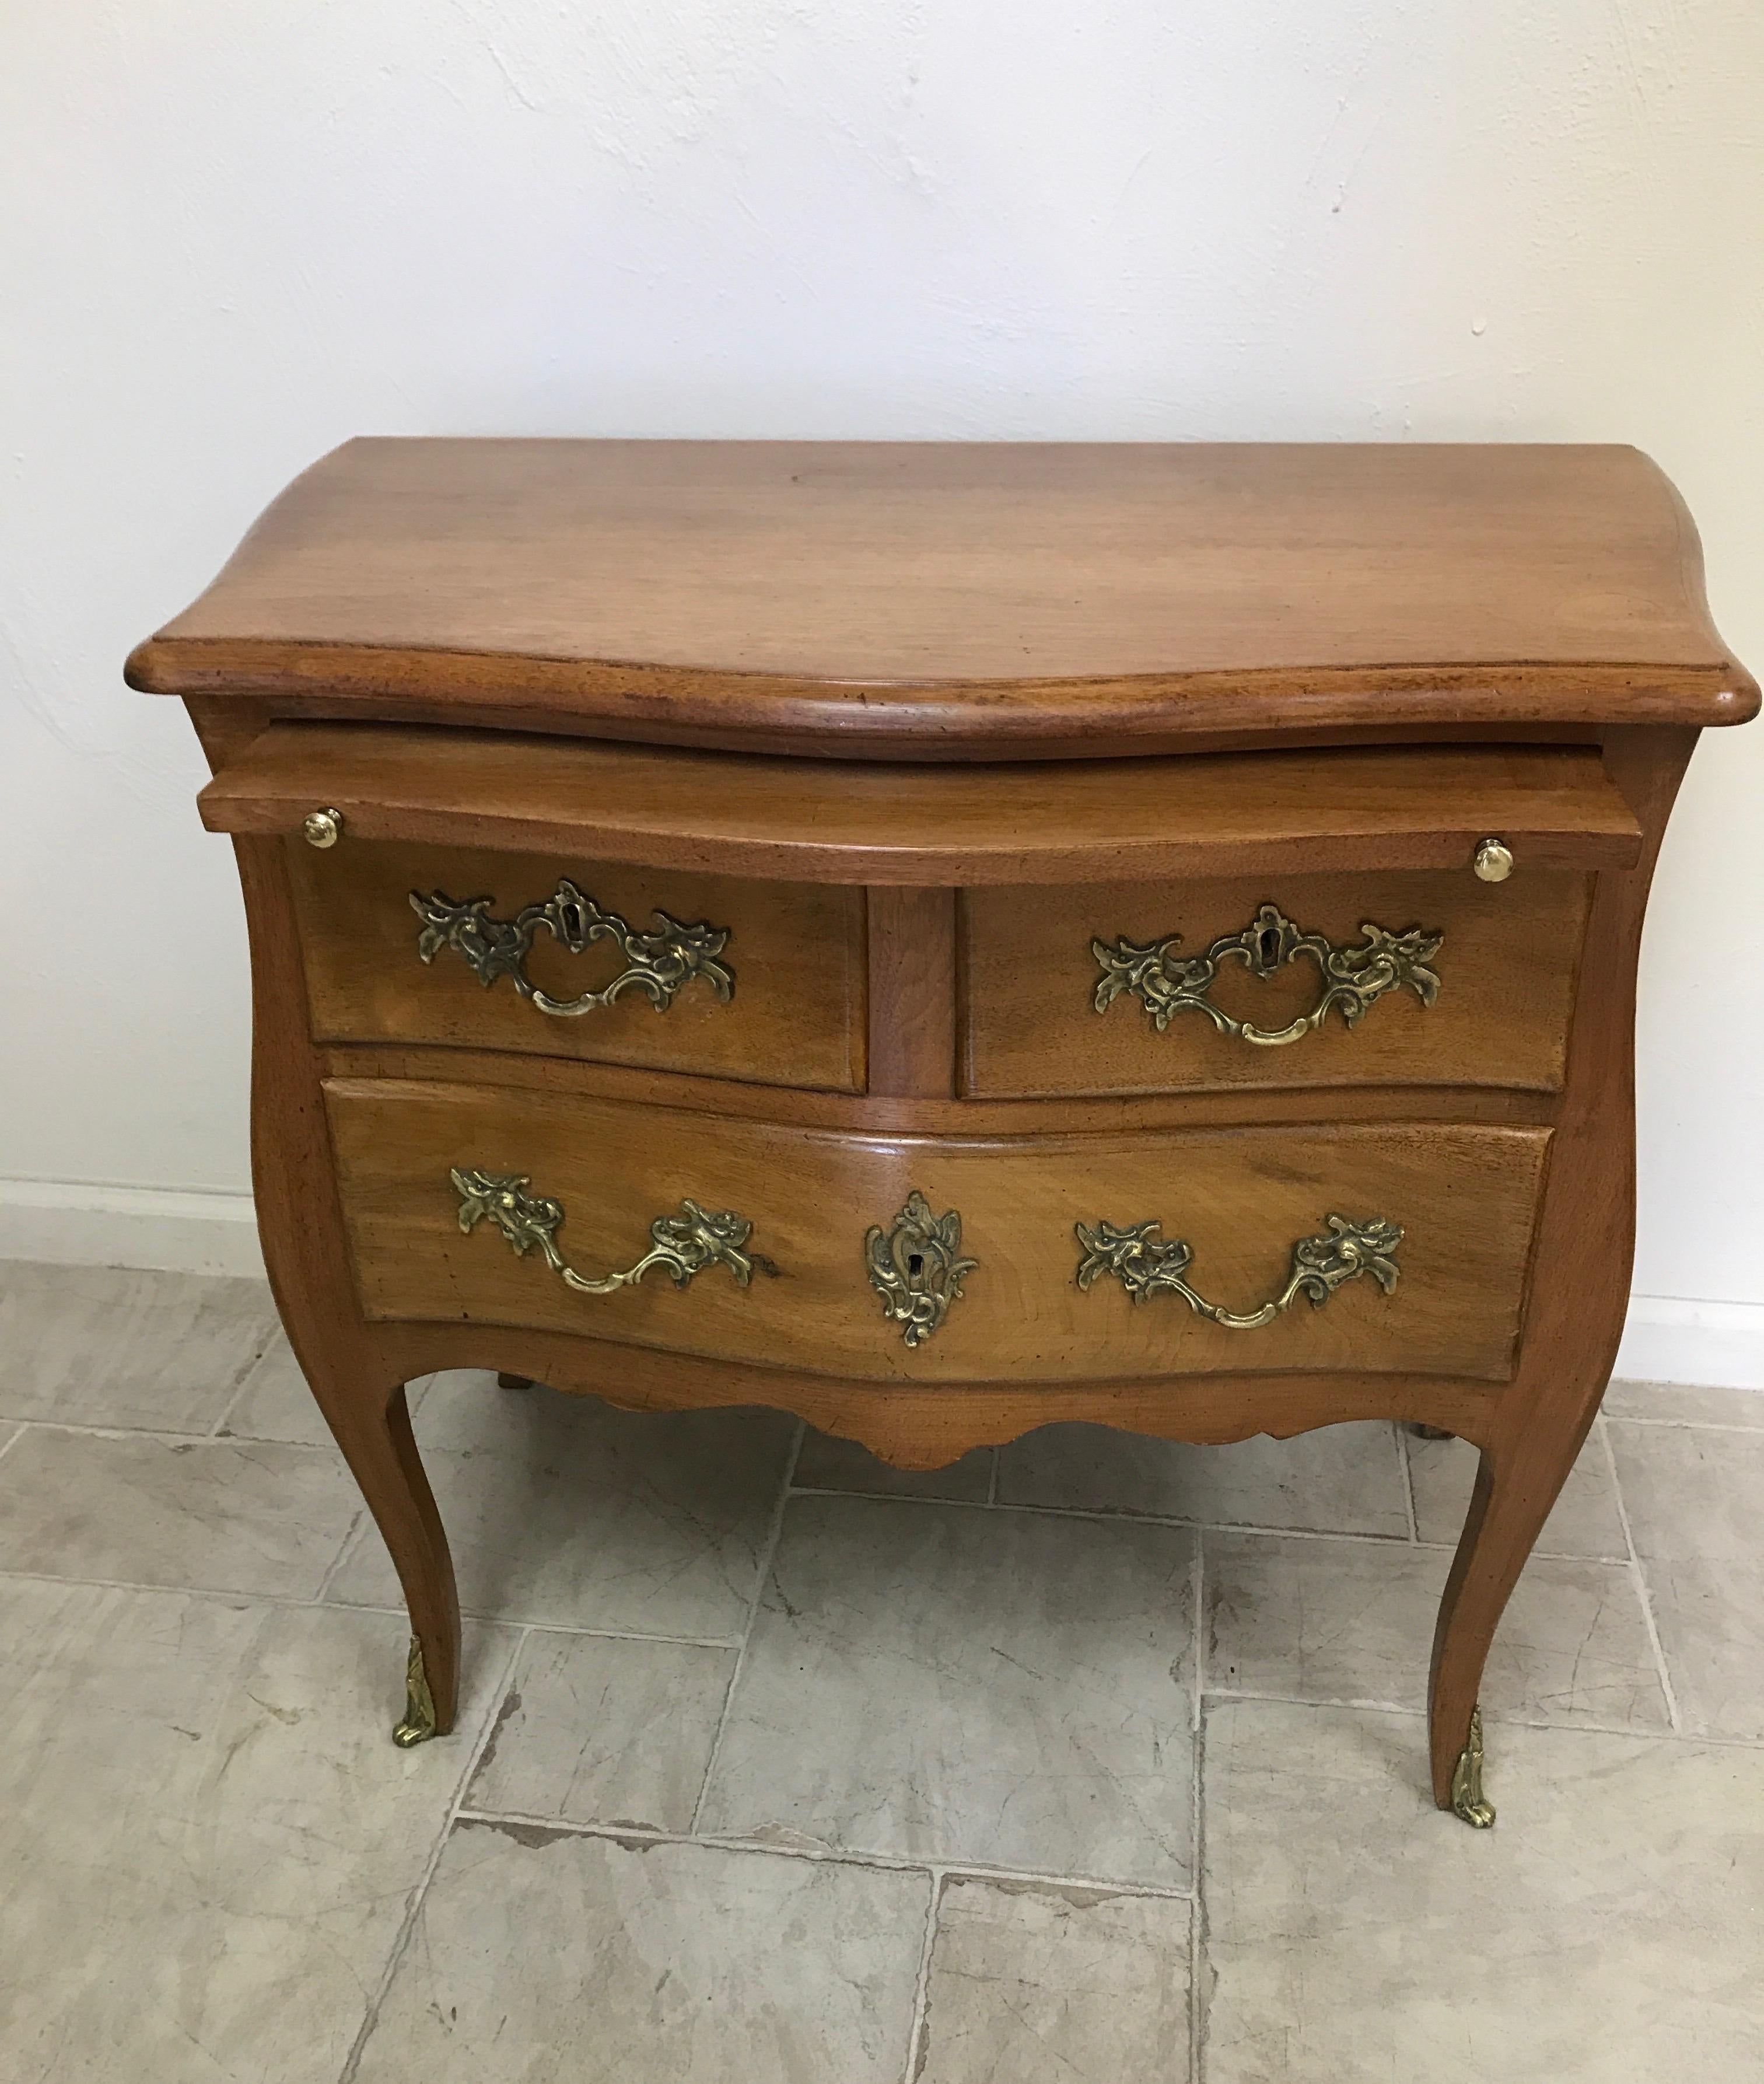 Three drawer side table/commode with pull out extension above drawers.